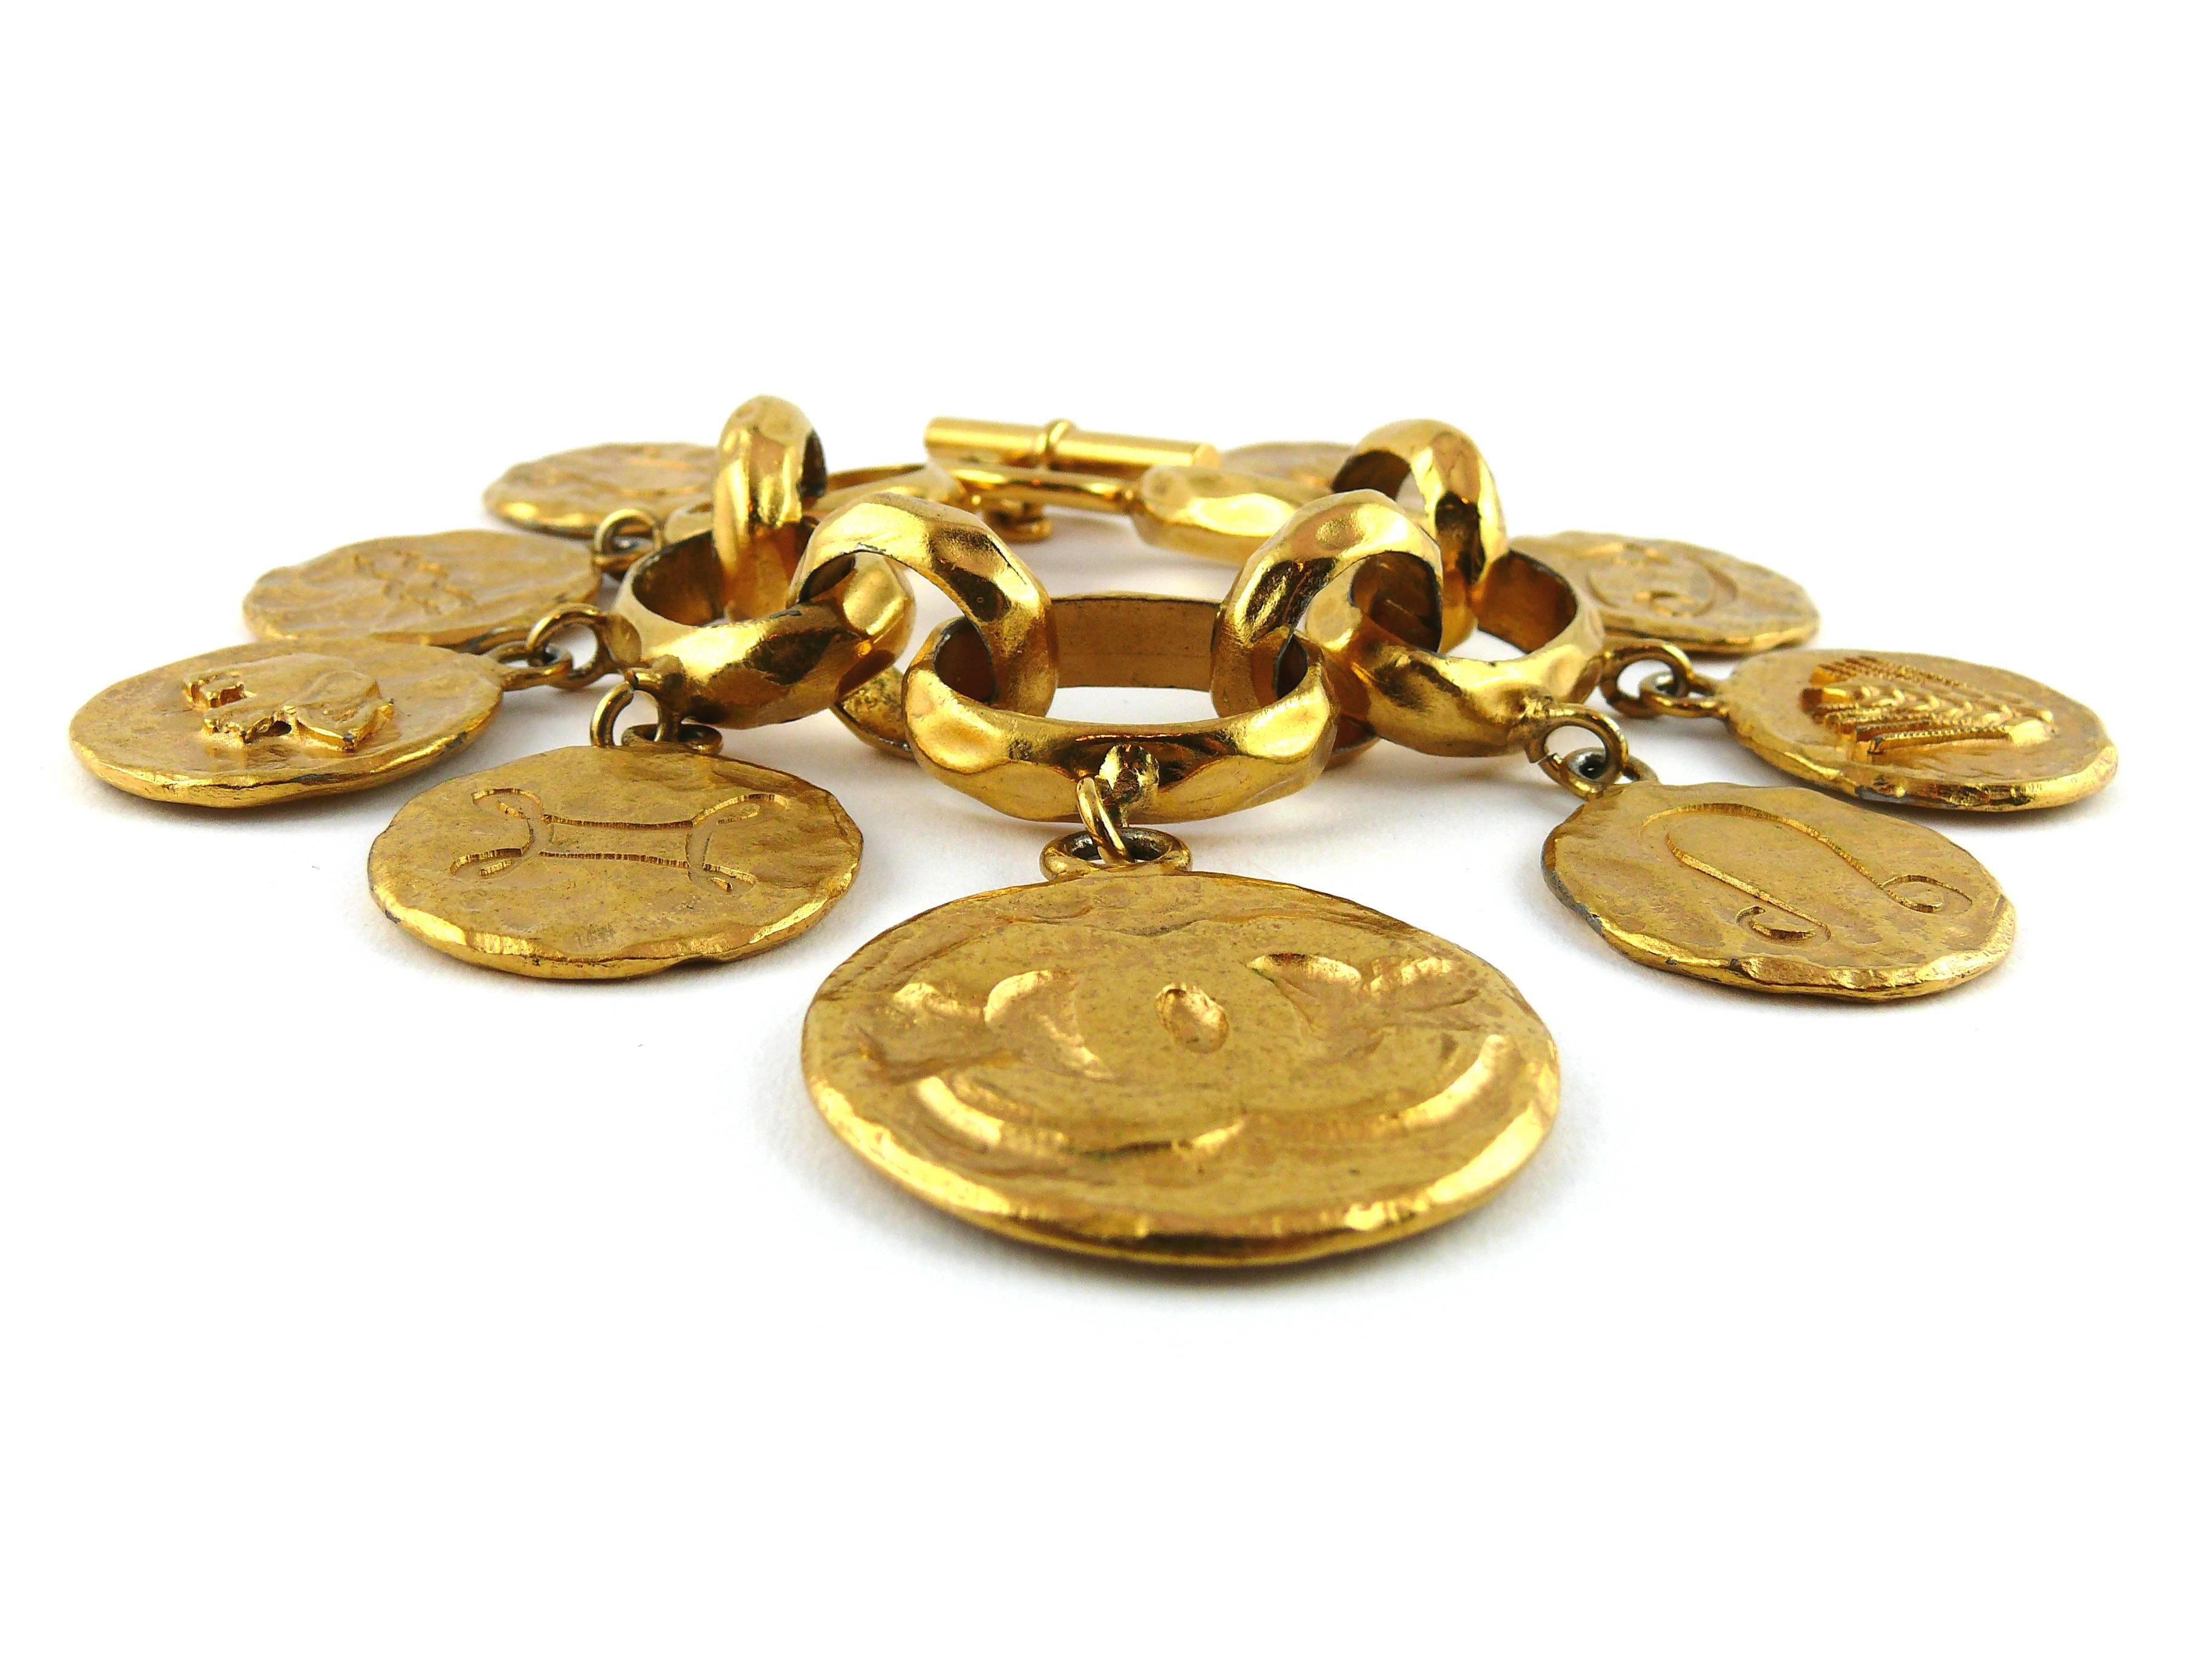 CHANEL vintage rare gold plated charm bracelet featuring 9 large coins and chunky hammered oval shaped links.

Charms feature zodiac signs, Coco Chanel profile, wheat, interlocking CC insigna, elephant.

T-bar and ring closure.

Has some